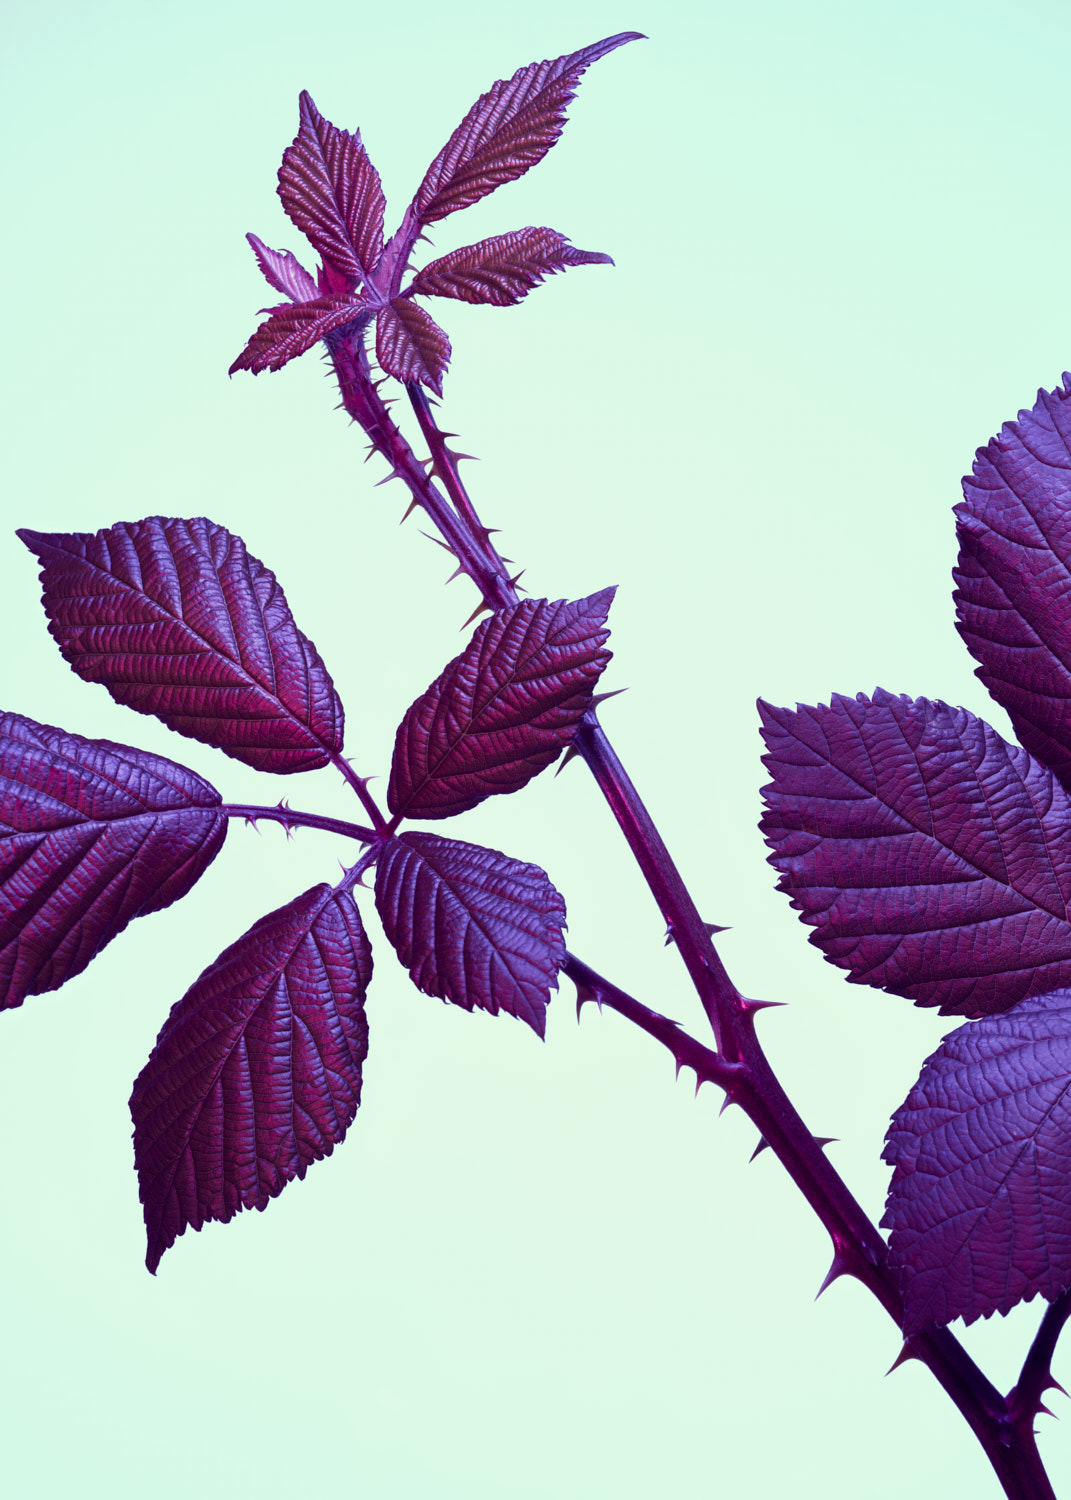 Blackberry Plant showing bramble and leaves - Ryan Ball Food Photographer London